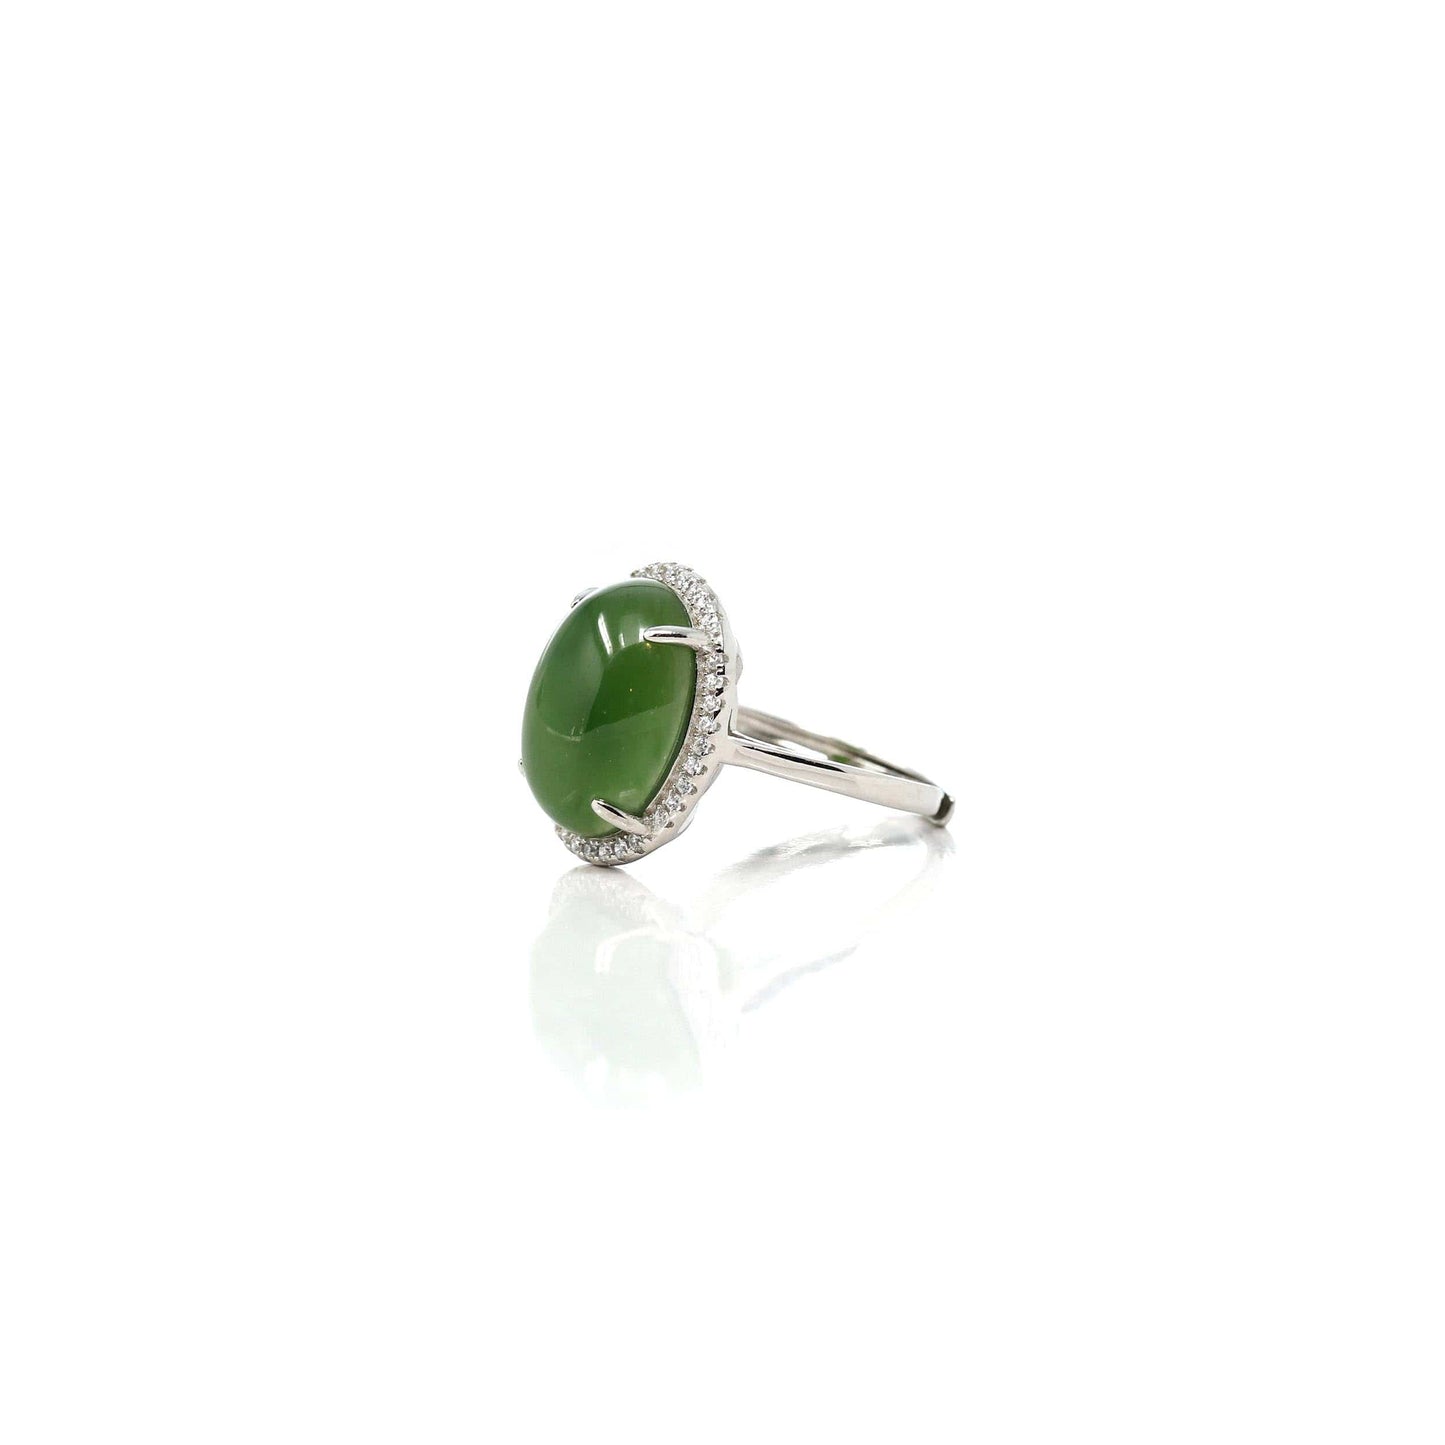 RealJade® Co. Jade Ring  RealJade® Co. "Classic Oval With Accents" Sterling Silver Real Green Nephrite Jade Classic Ring For Her